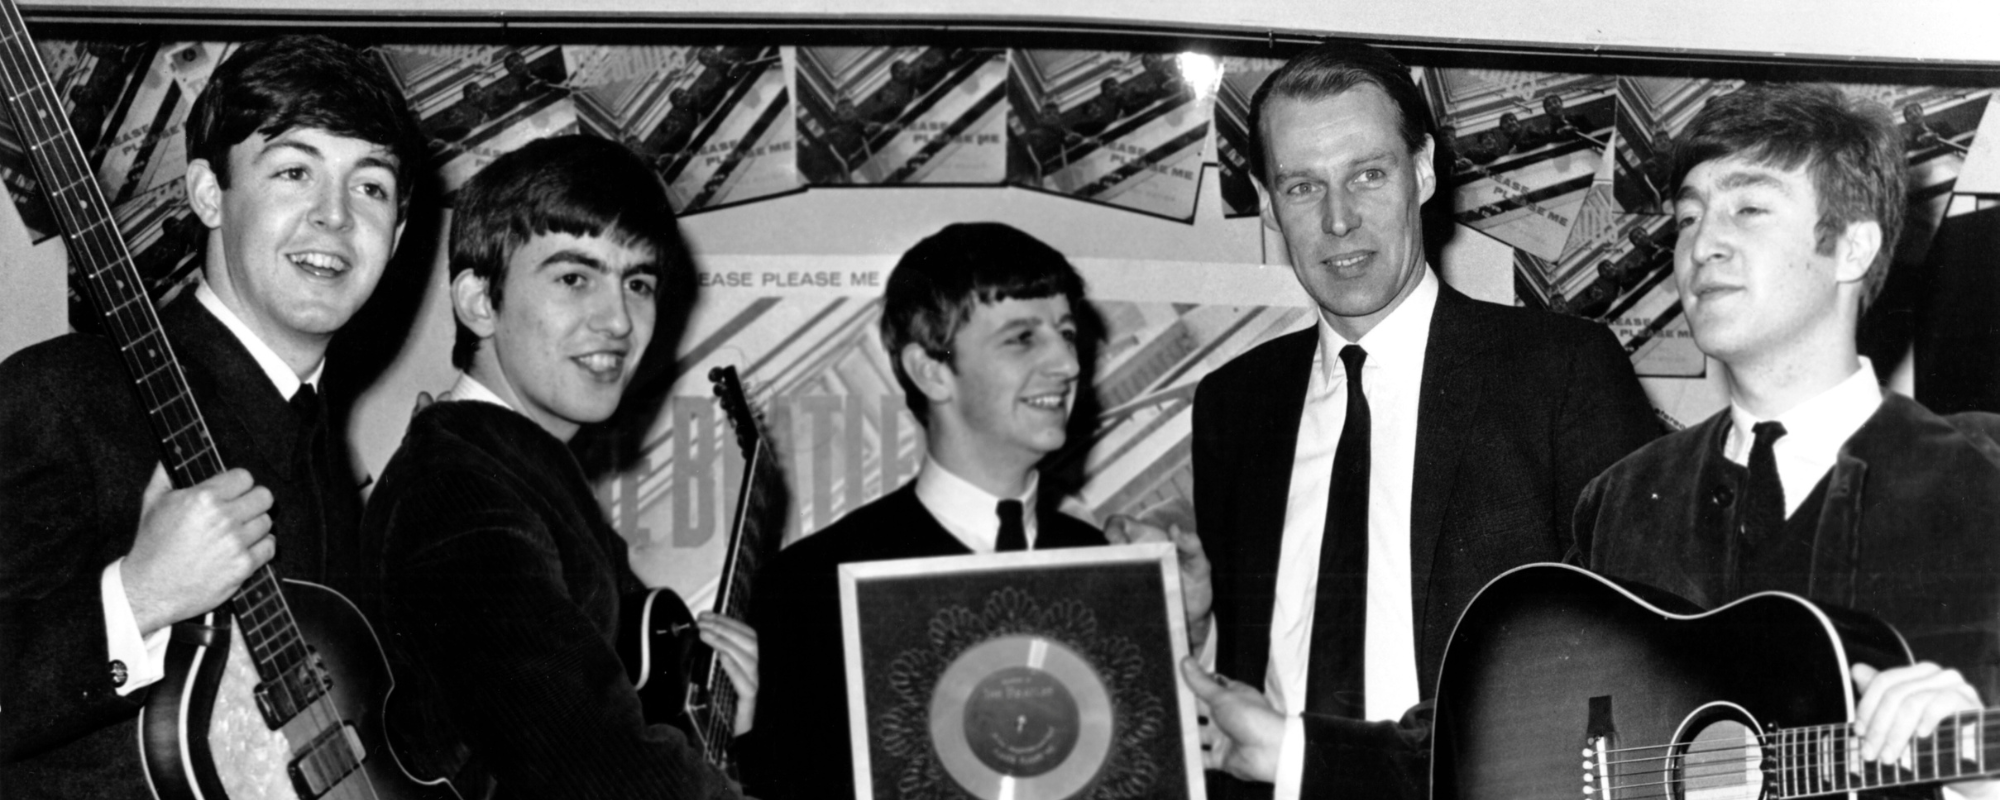 5 Fascinating Facts About “Fifth Beatle” George Martin (That Don’t Have to Do With The Beatles)